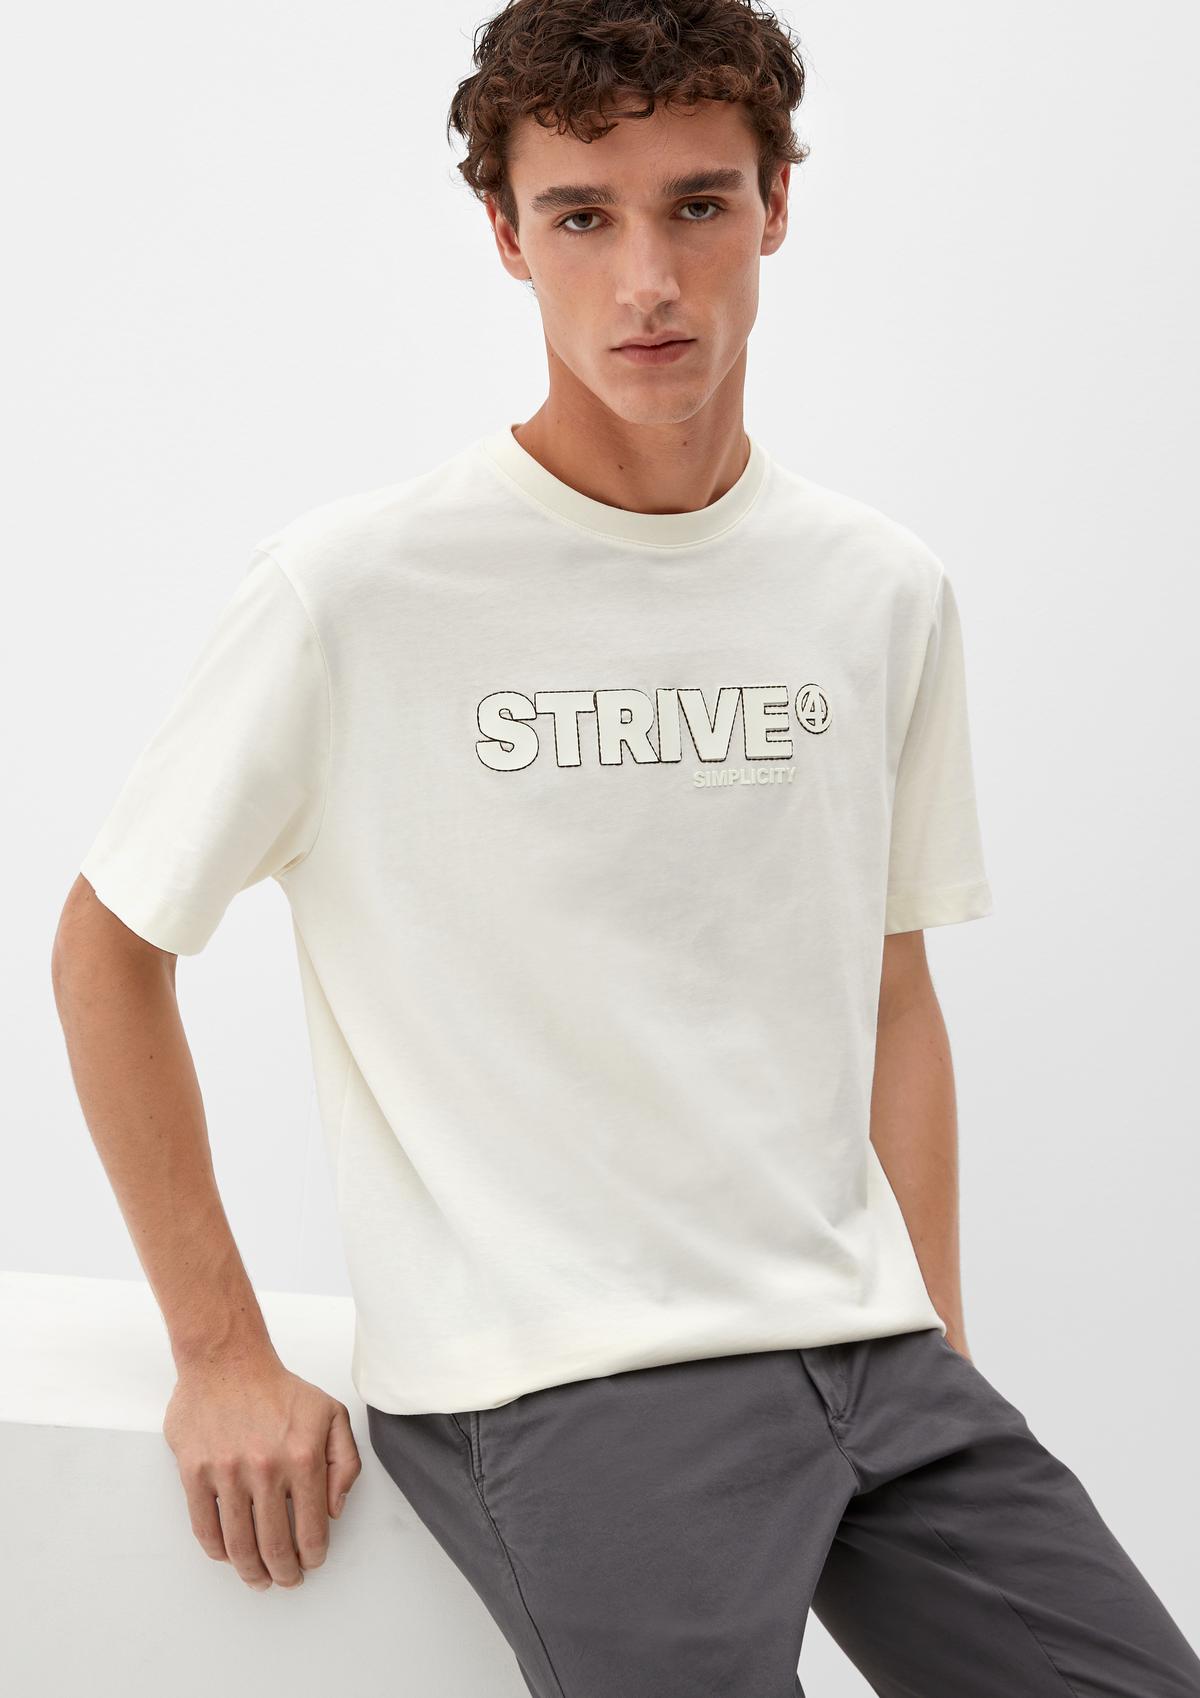 s.Oliver T-shirt with printed lettering